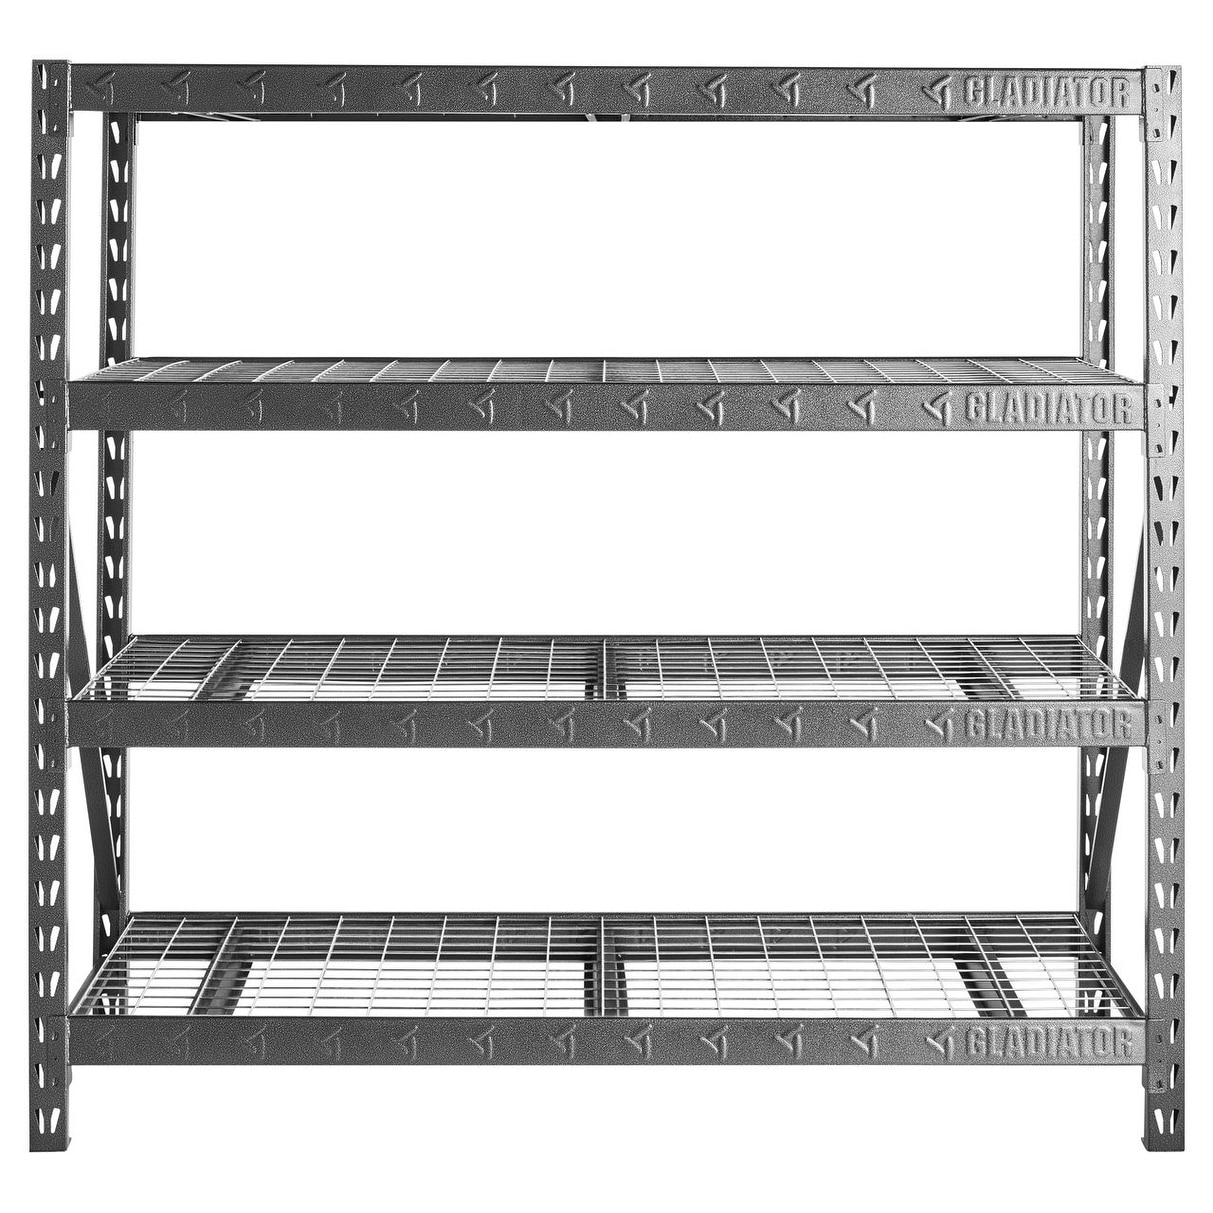 https://ak1.ostkcdn.com/images/products/is/images/direct/093eabeaebadf190fe7150686fdd86fcd6e66250/77%22-Wide-Heavy-Duty-Rack-with-Four-24%22-Deep-Shelves.jpg